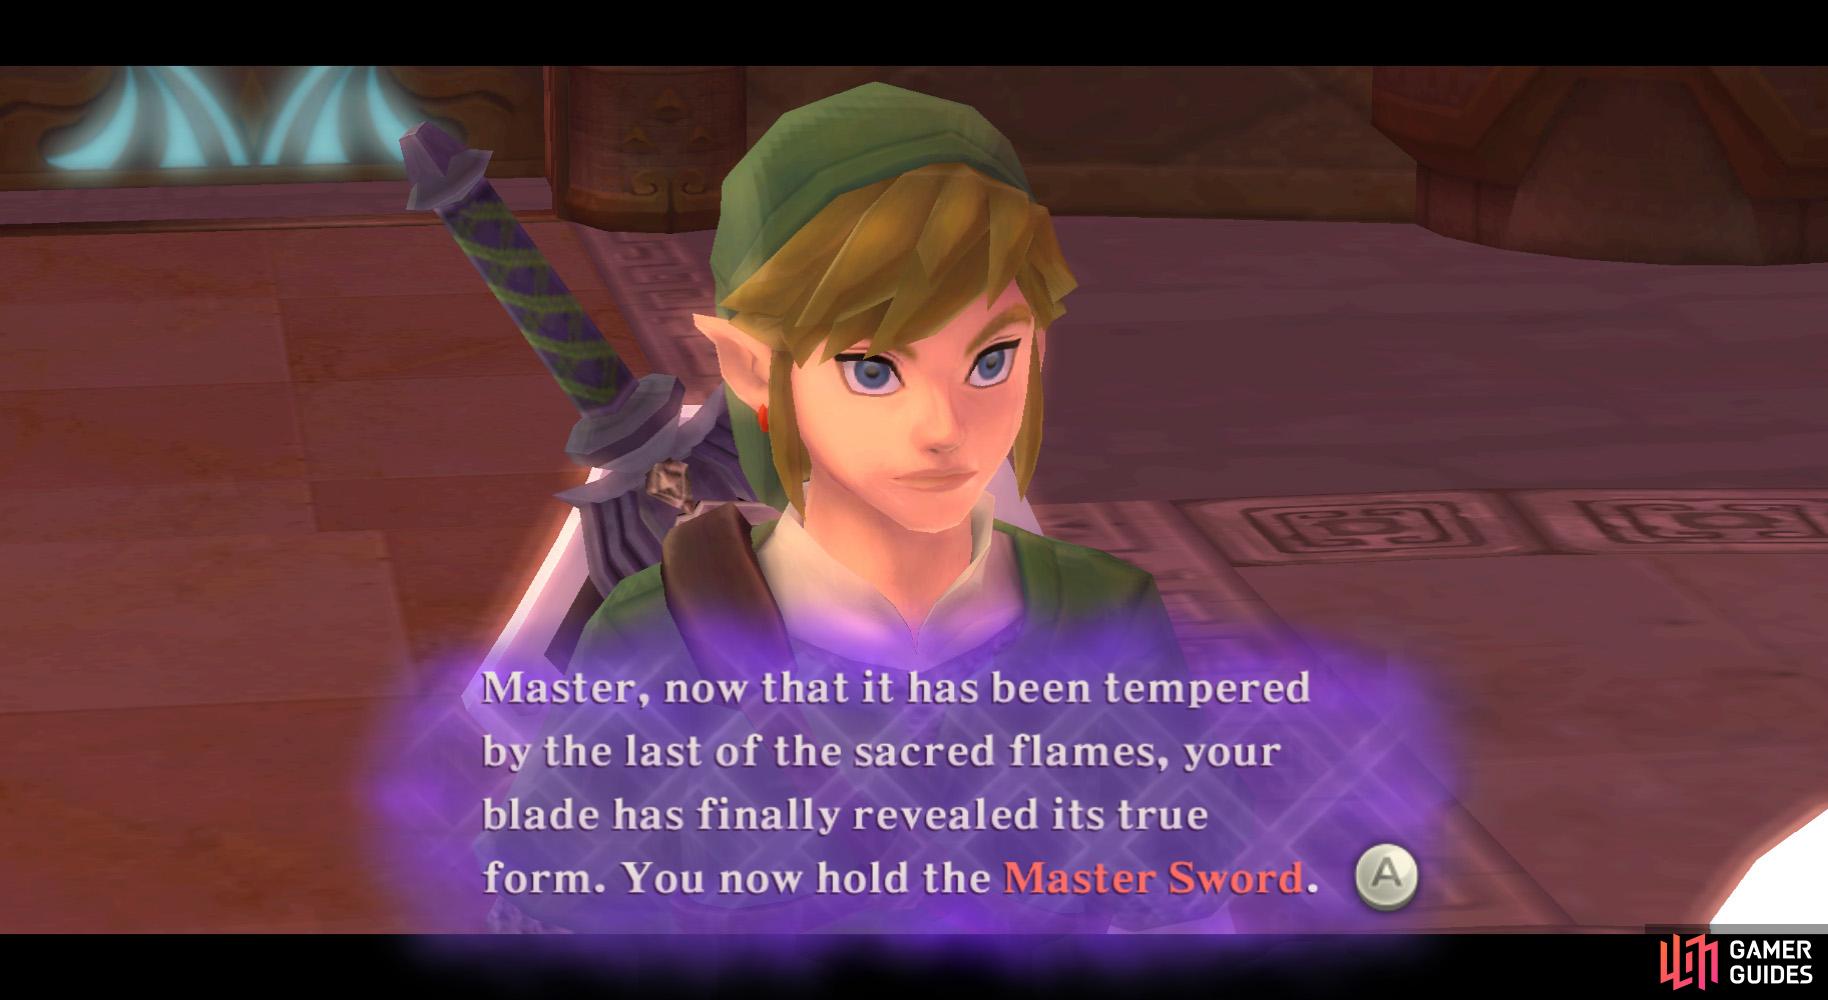 Youre Fis master… Hence, the Master Sword. Get it?